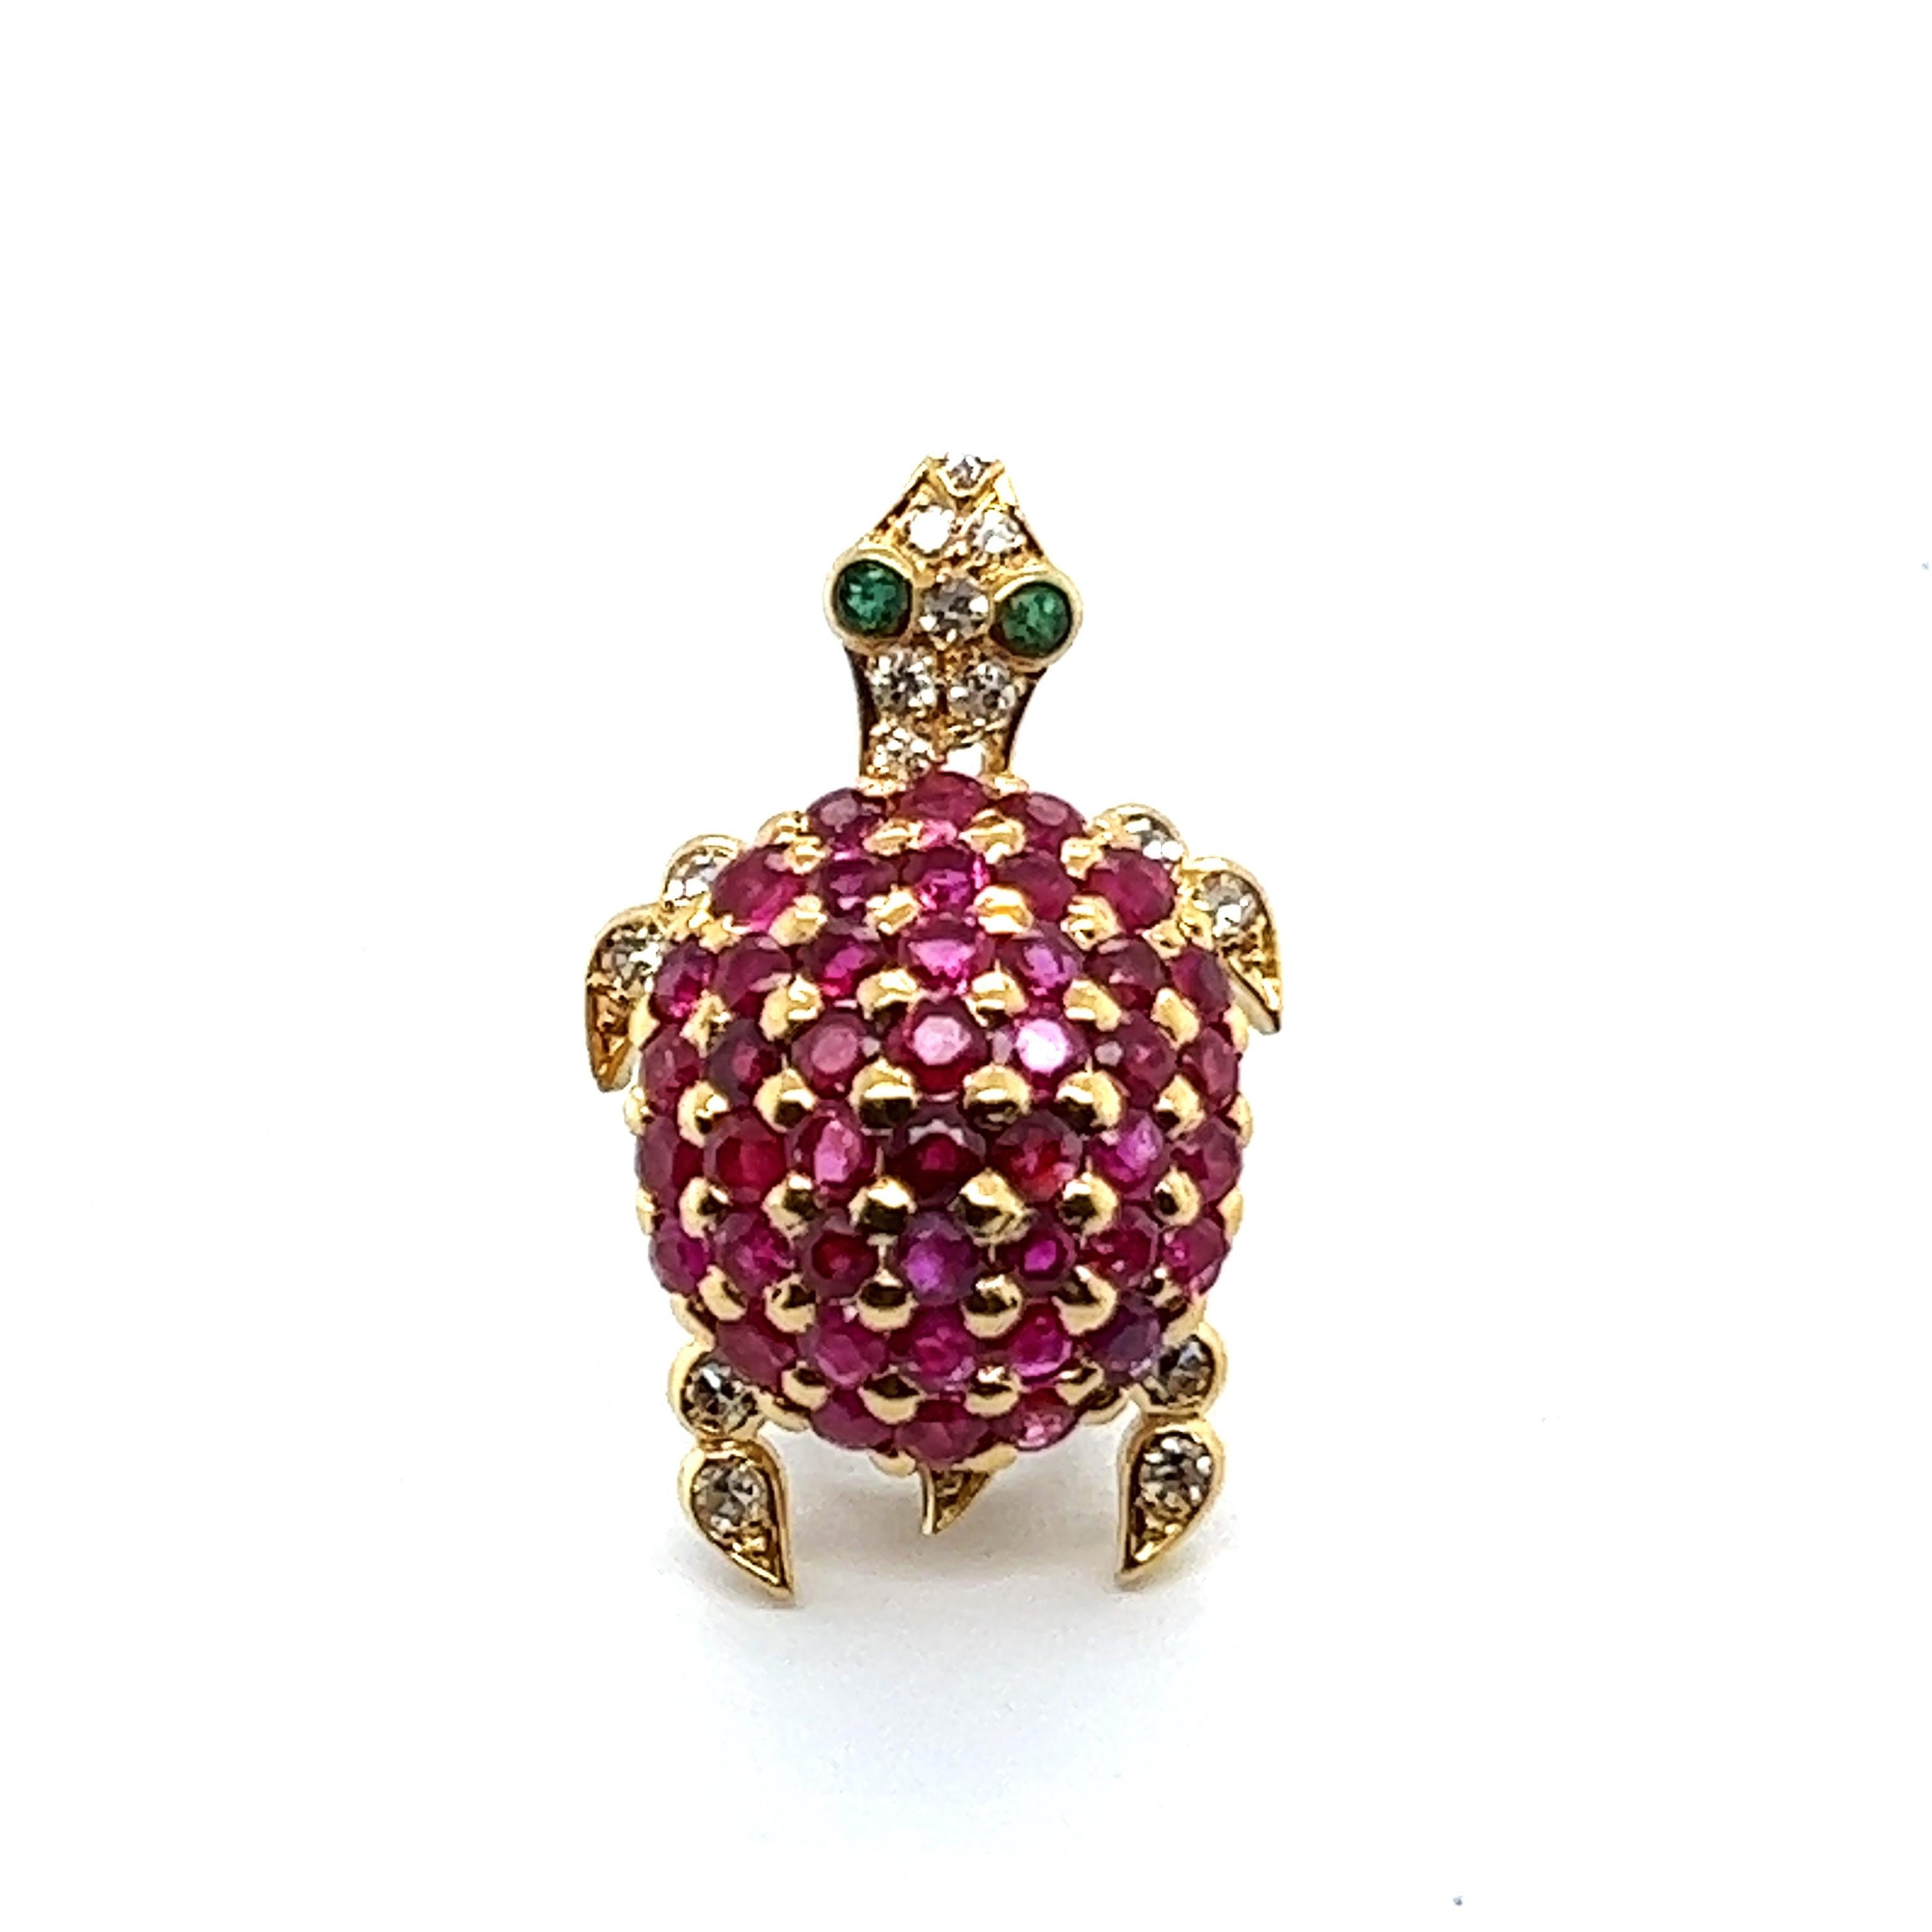 Presenting a playful turtle brooch with rubies and diamonds in 18 Karat yellow gold.  A little baby turtle features a lustrous body adorned with 44 round rubies, totaling 1.34 carats, while its eyes sparkle with two round emeralds. The delicate legs